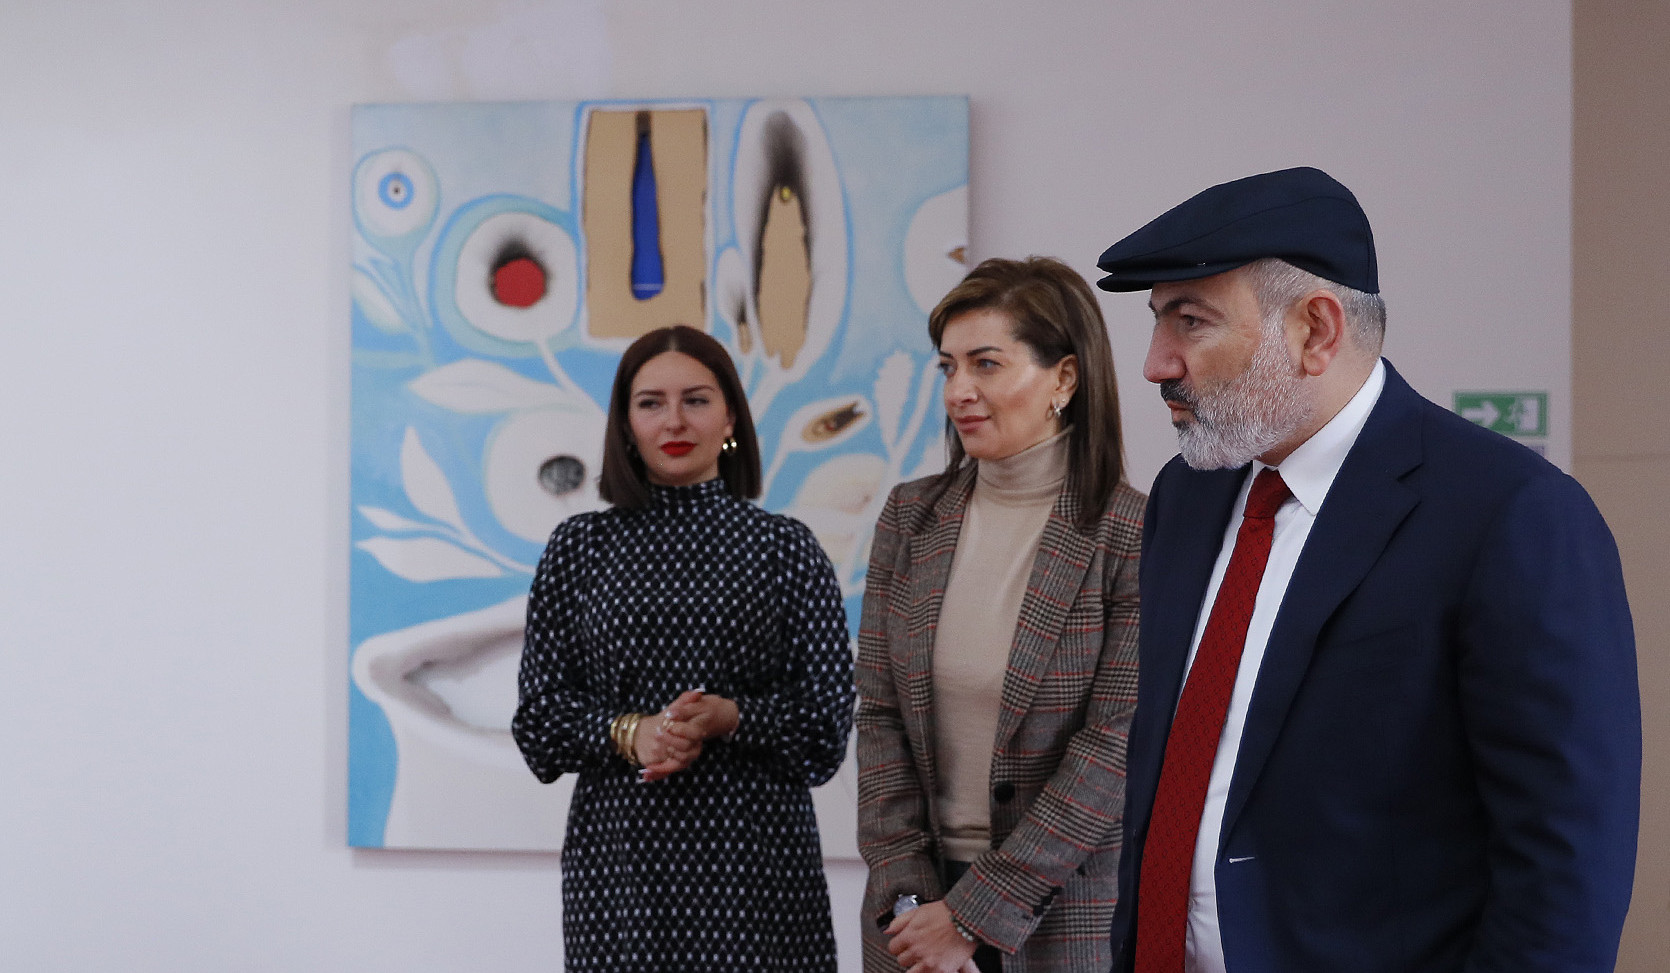 Prime Minister visited exhibition entitled Ghosts of Communism’s Demise with with his wife